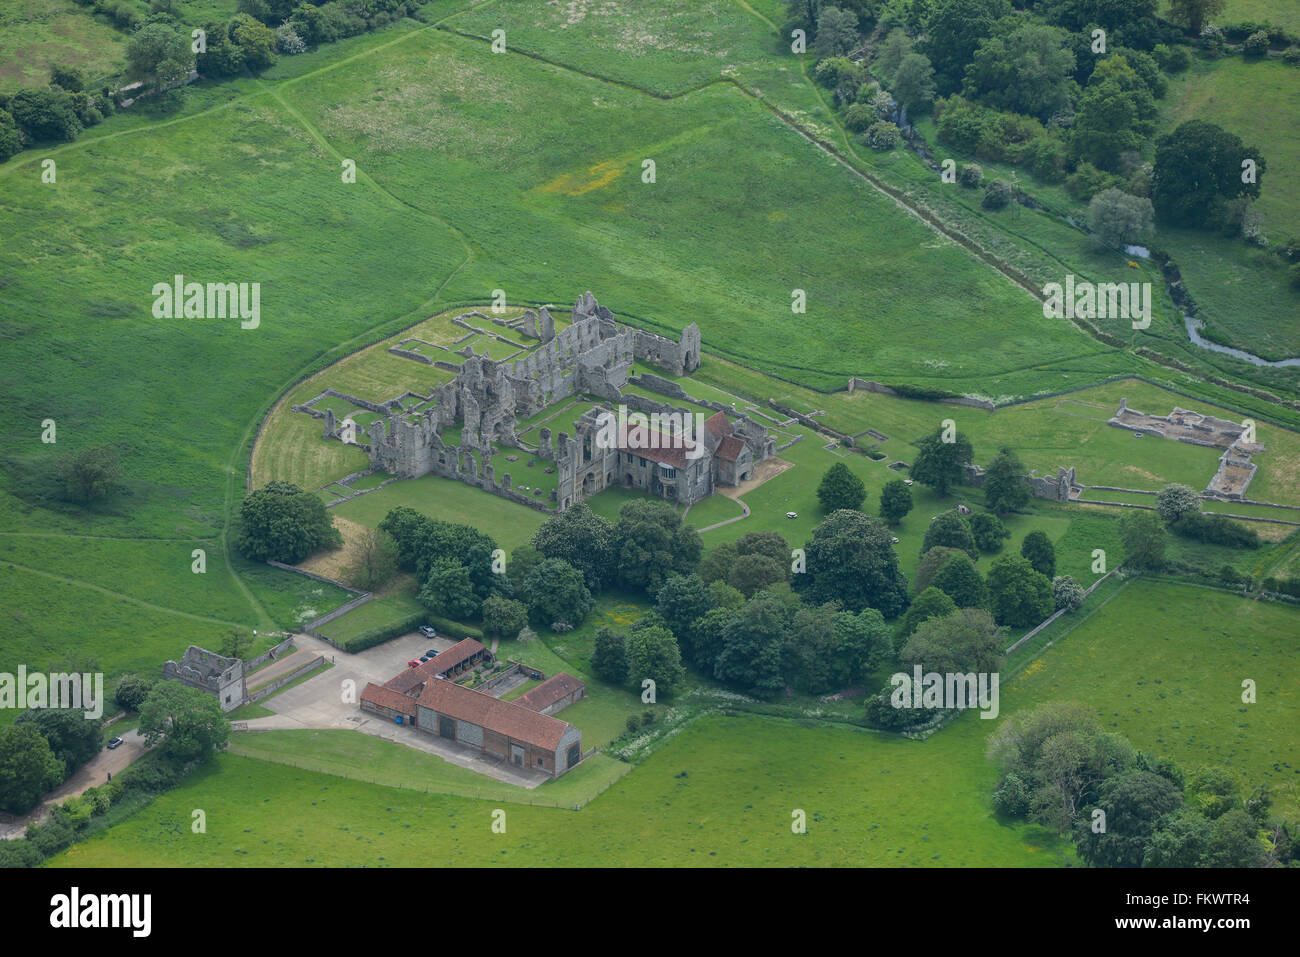 An aerial view of the ruins of Castle Acre Priory in Norfolk Stock Photo